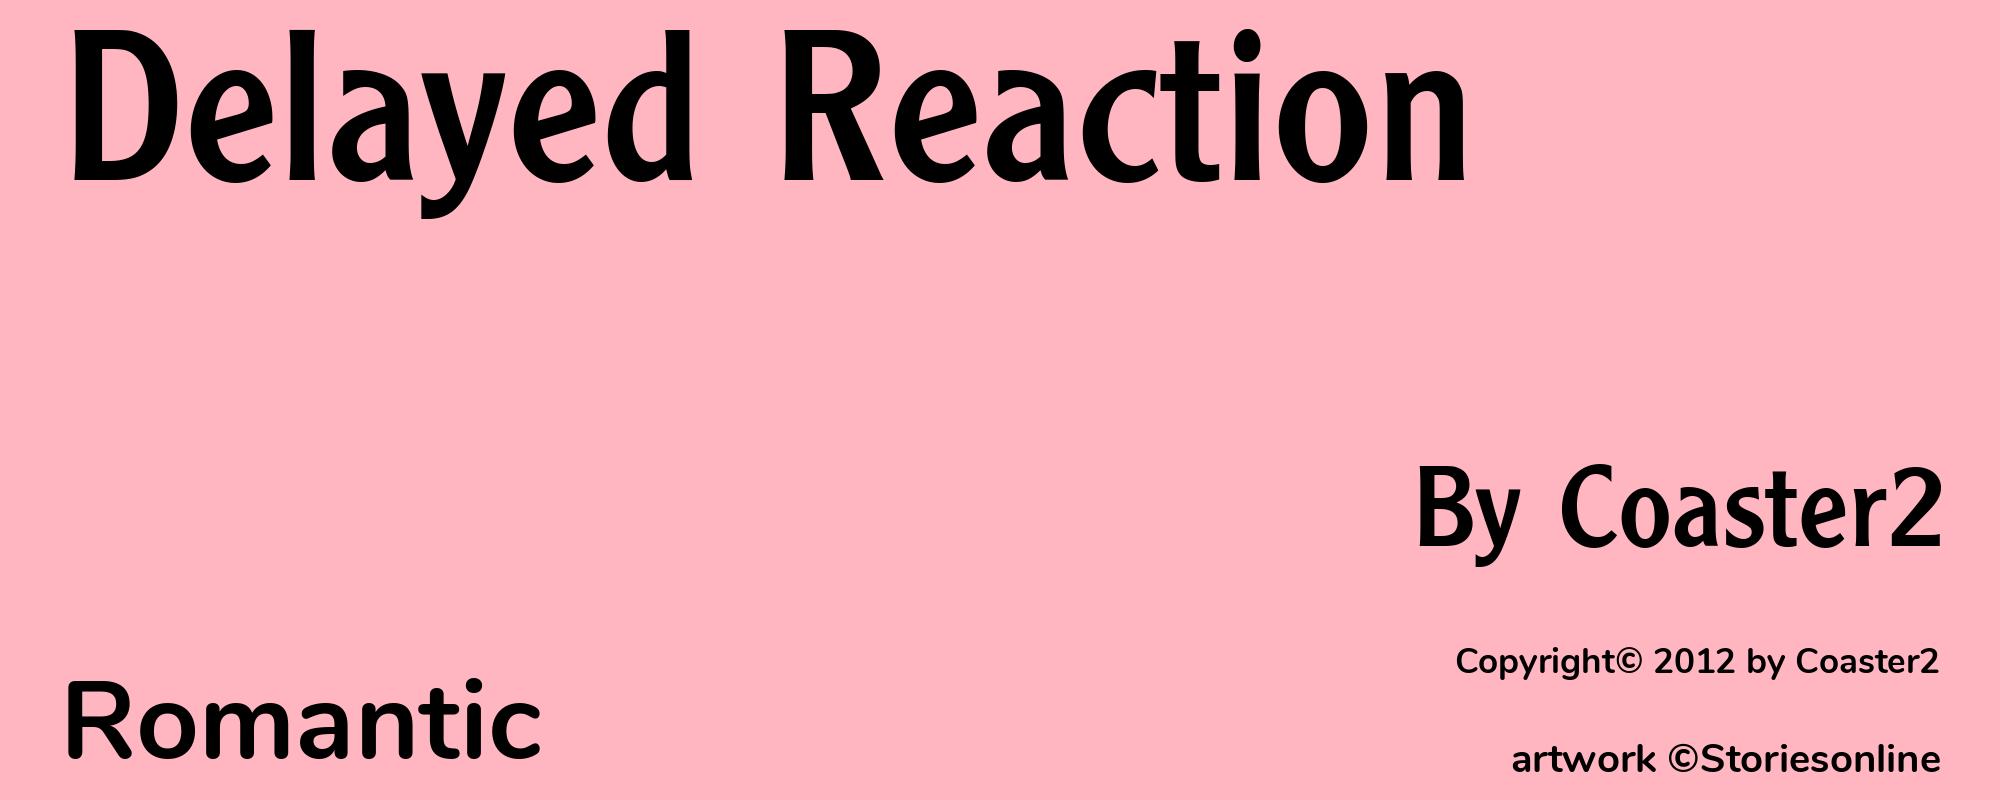 Delayed Reaction - Cover